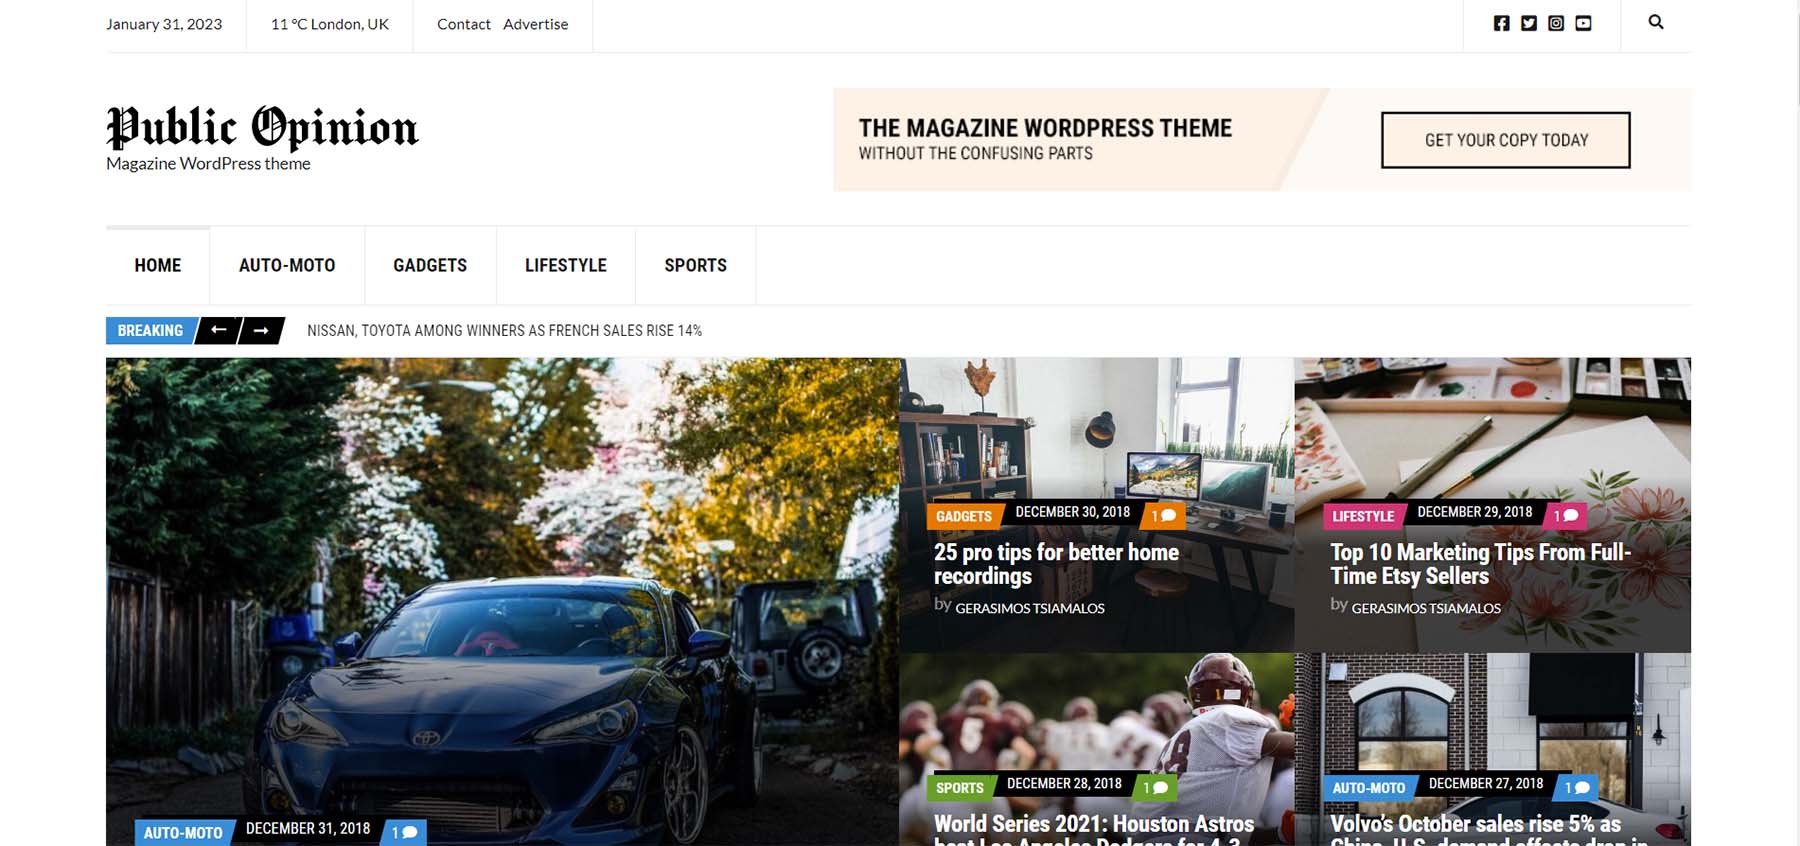 Public Opinion, one of the best Magazine WordPress Themes available today